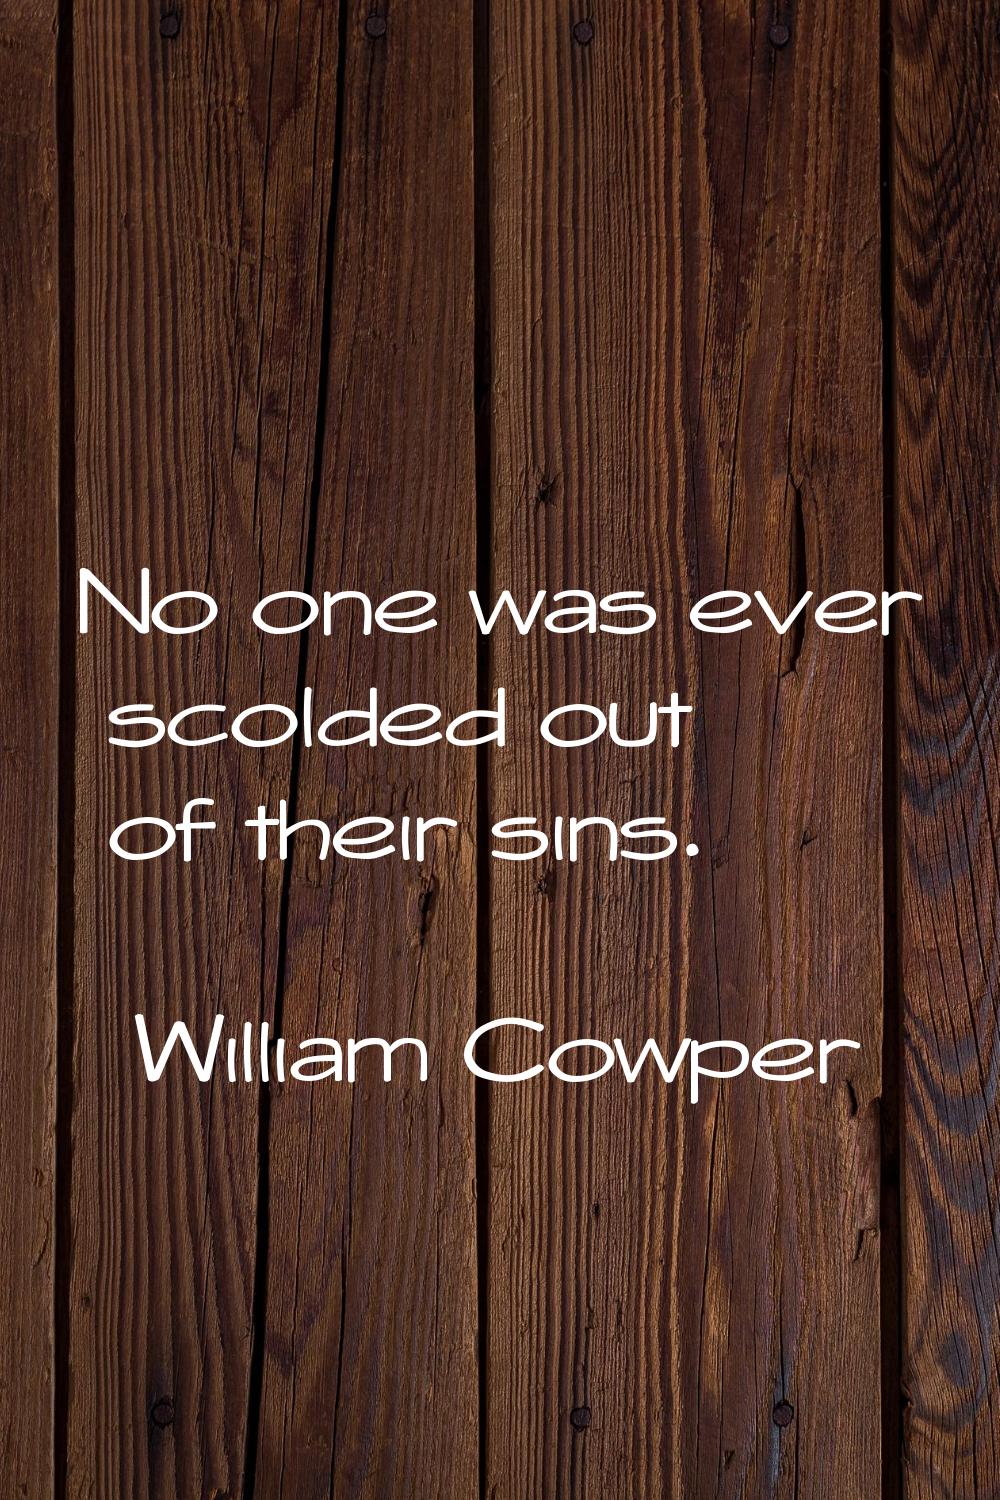 No one was ever scolded out of their sins.